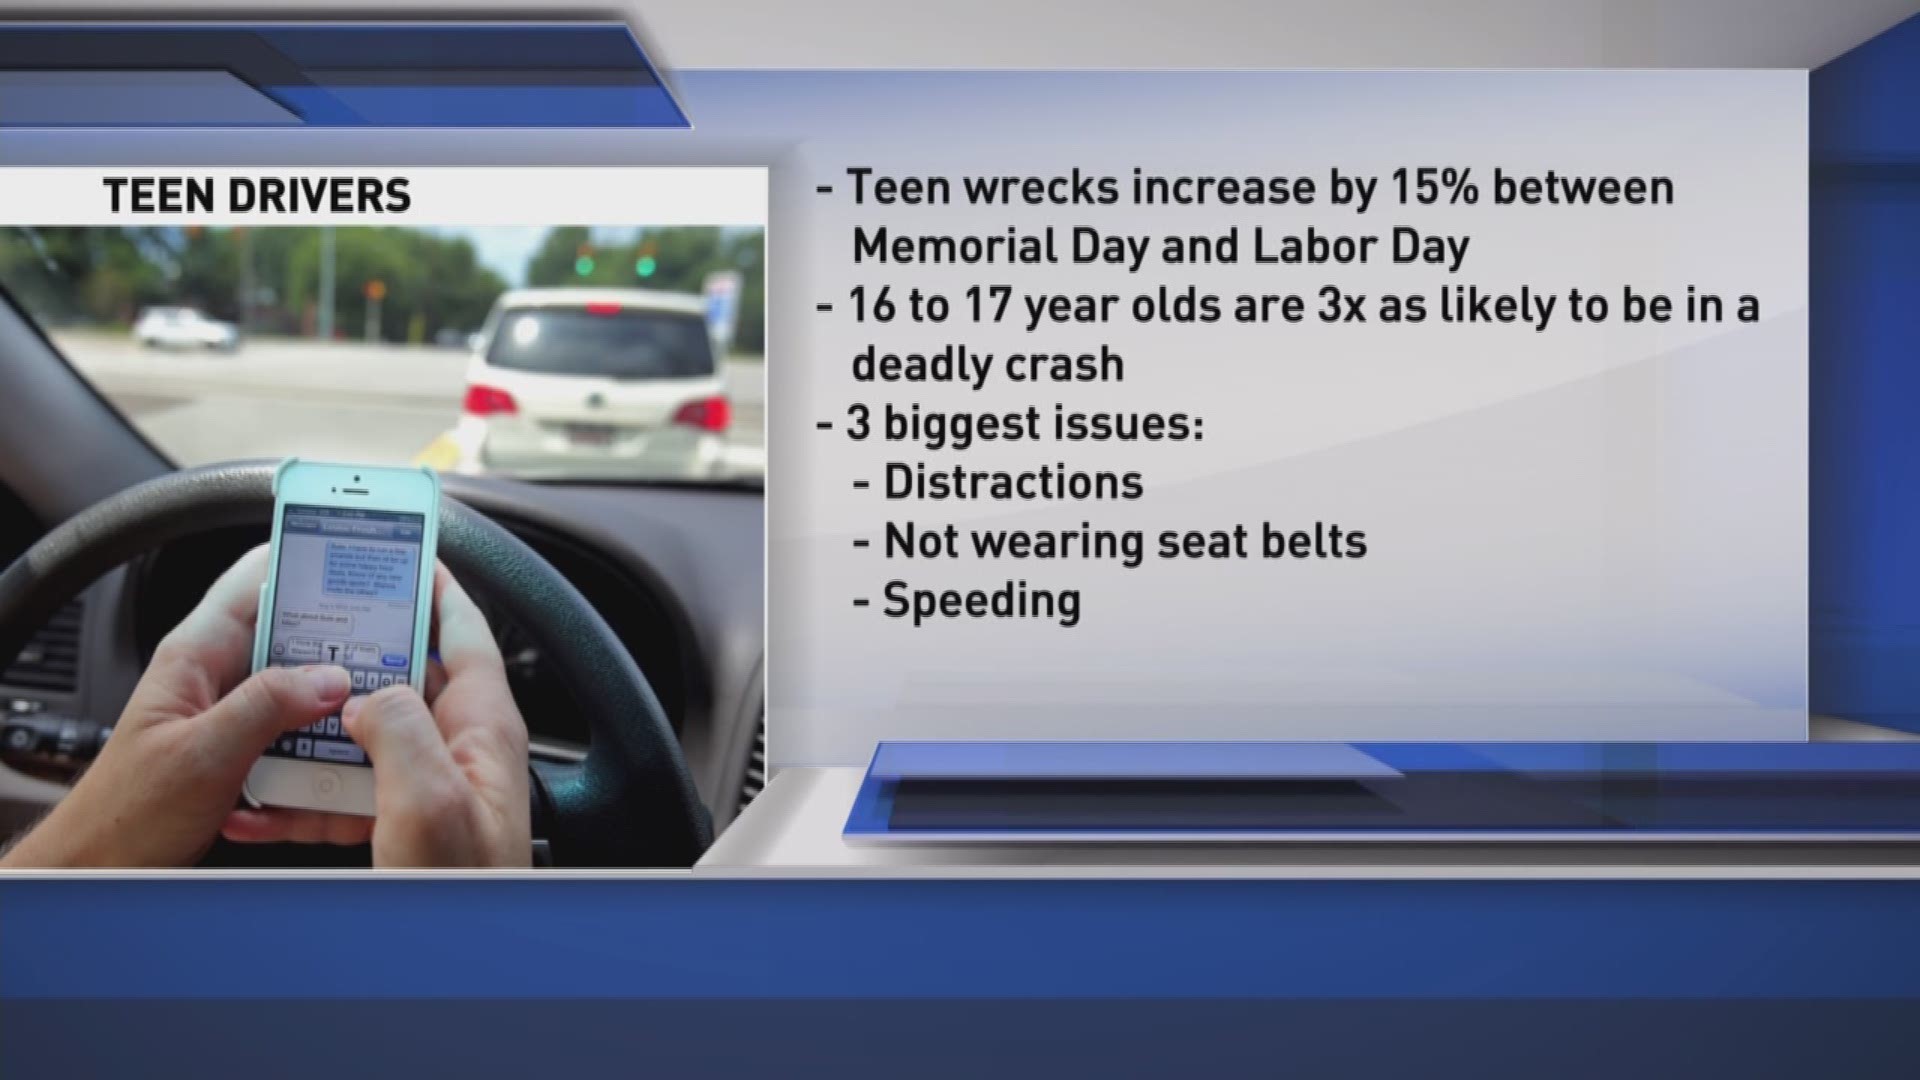 AAA says teen drivers are three times as likely to be in a deadly crash, and that crashes involving teens increase 15 percent between Memorial Day and Labor Day.